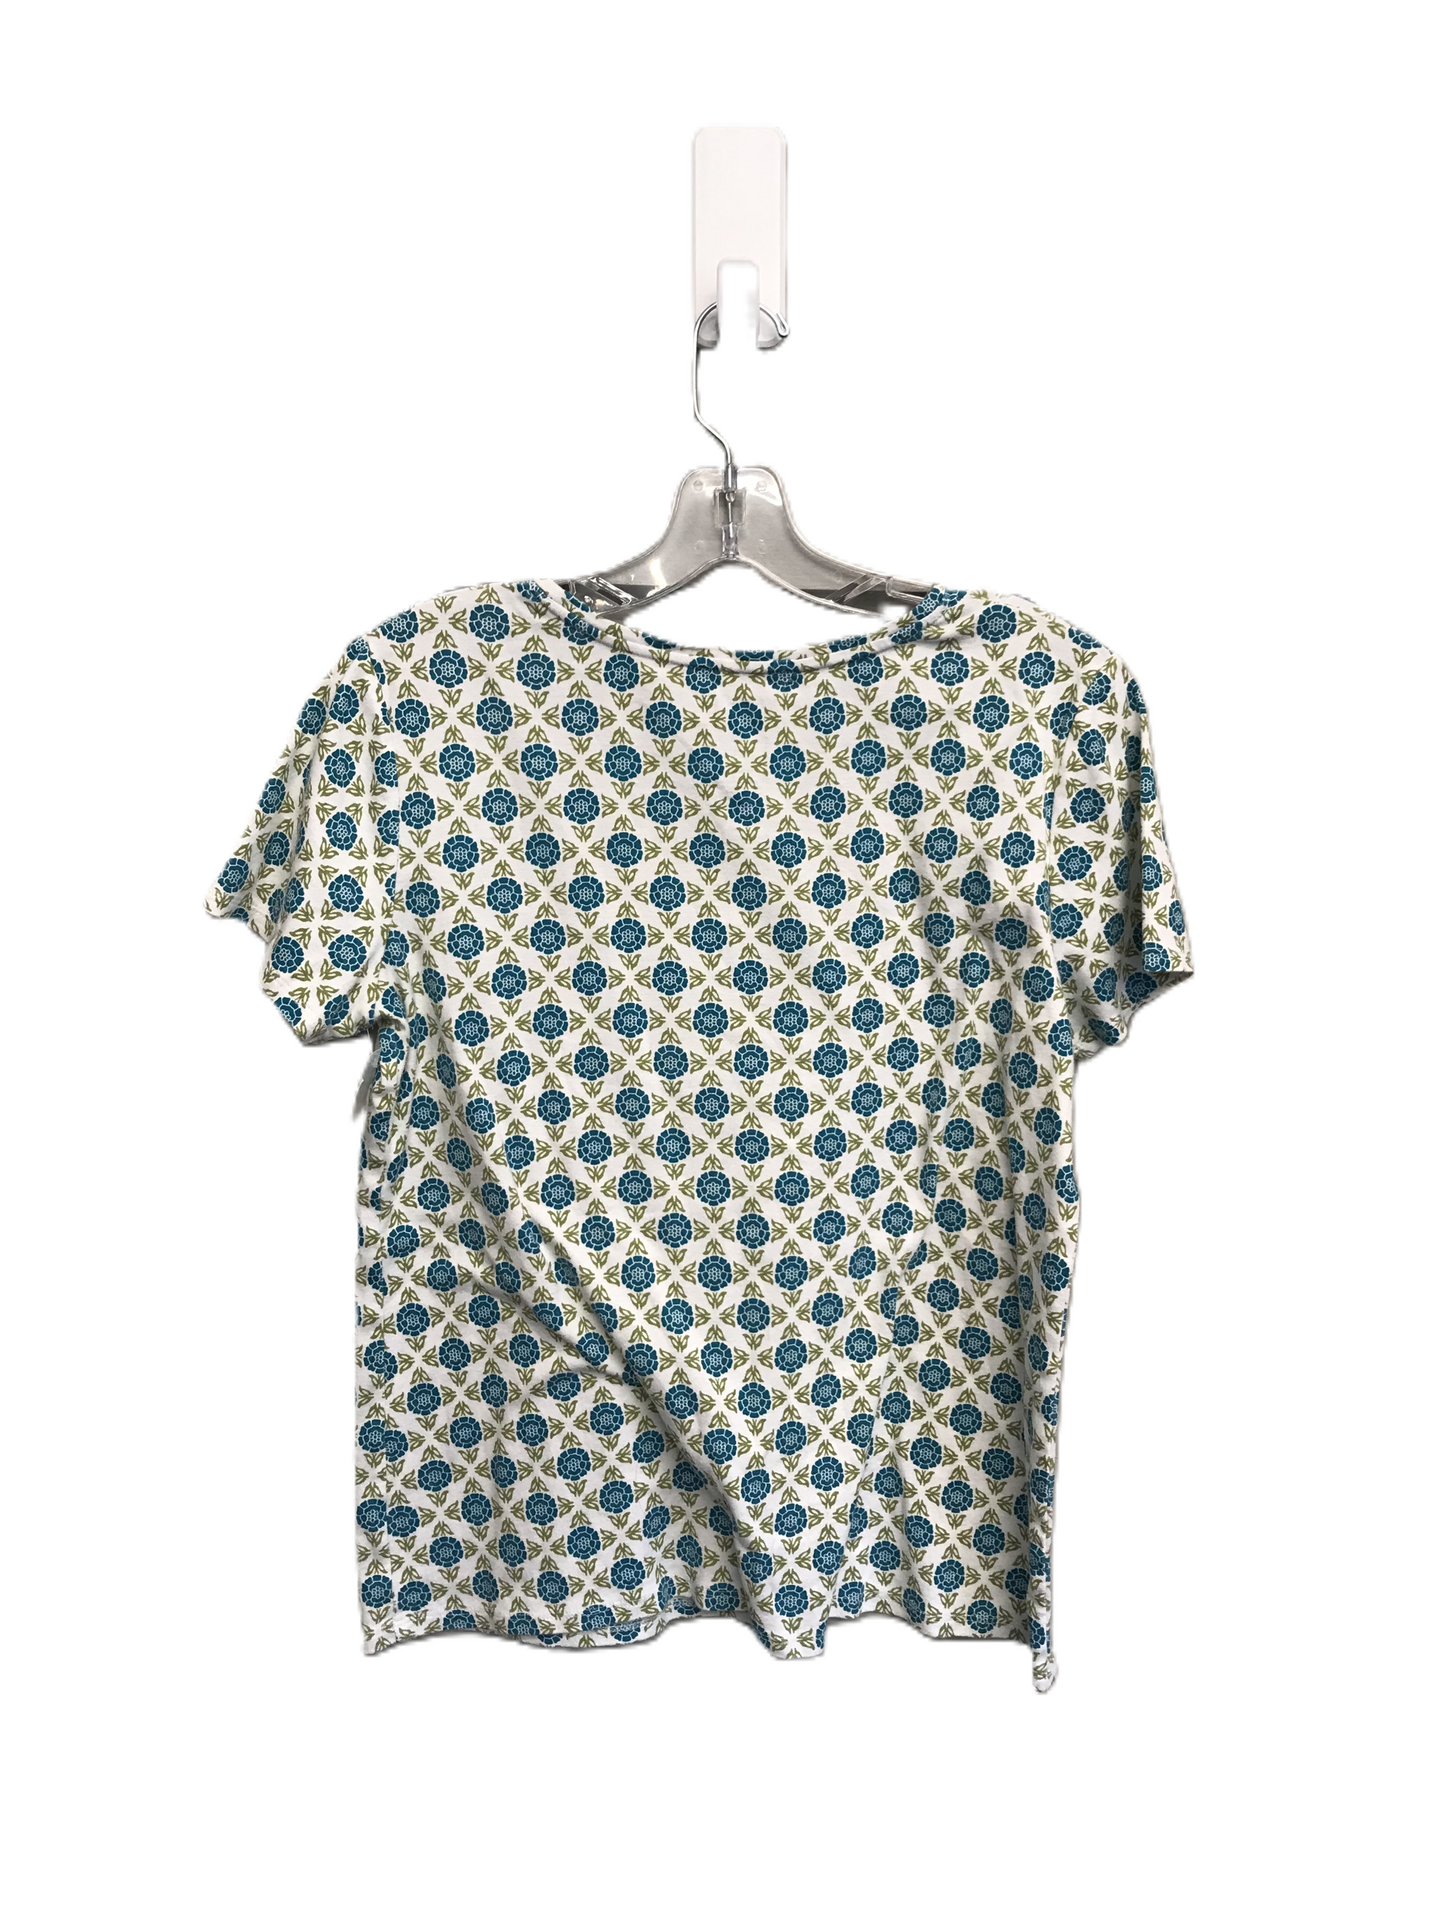 Green & White Top Short Sleeve Basic By Croft And Barrow, Size: M